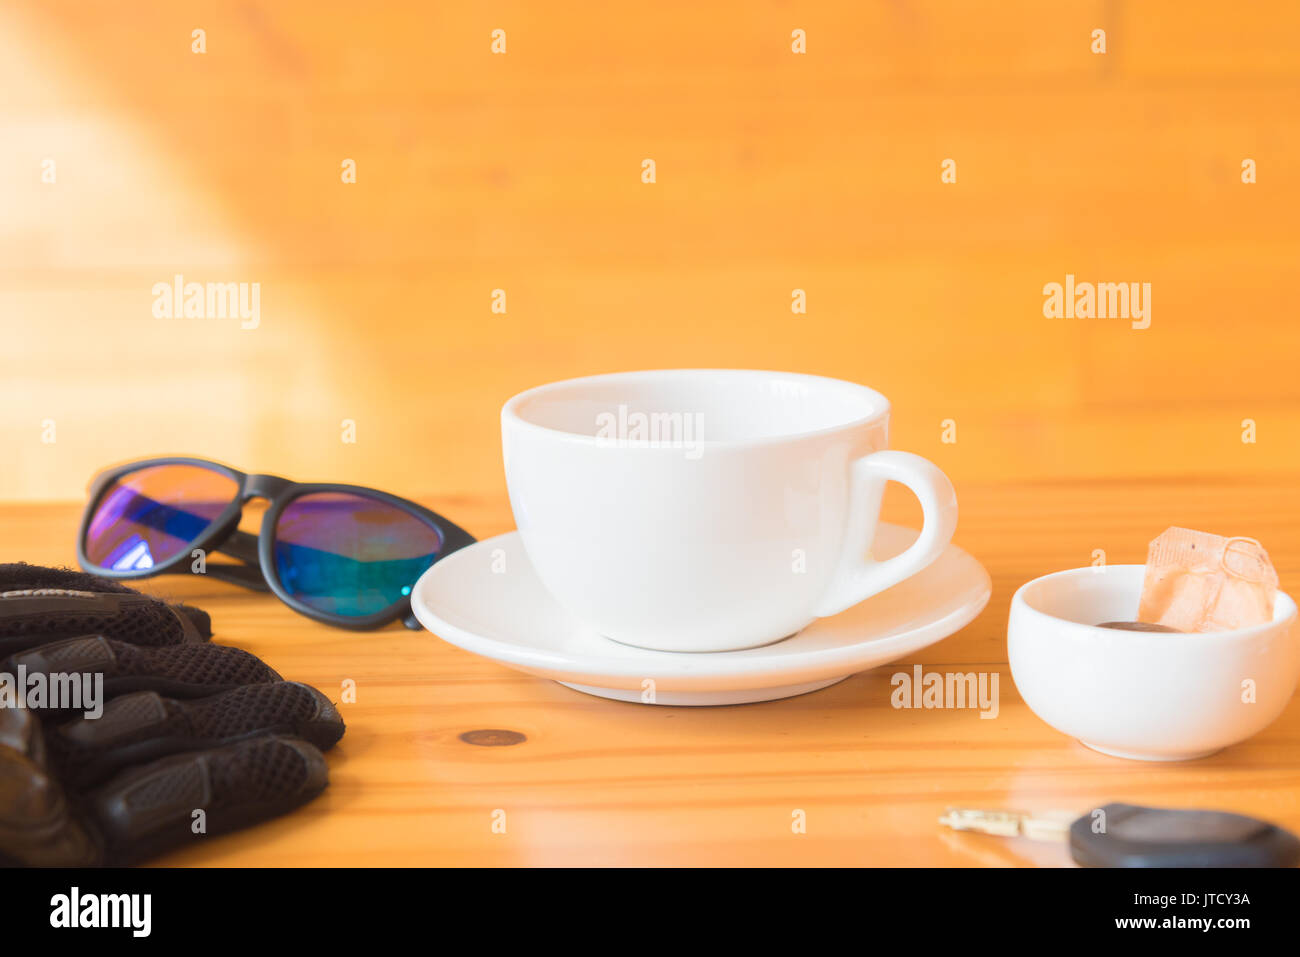 driving glove and glasses place near tea cup on the wooden table Stock Photo